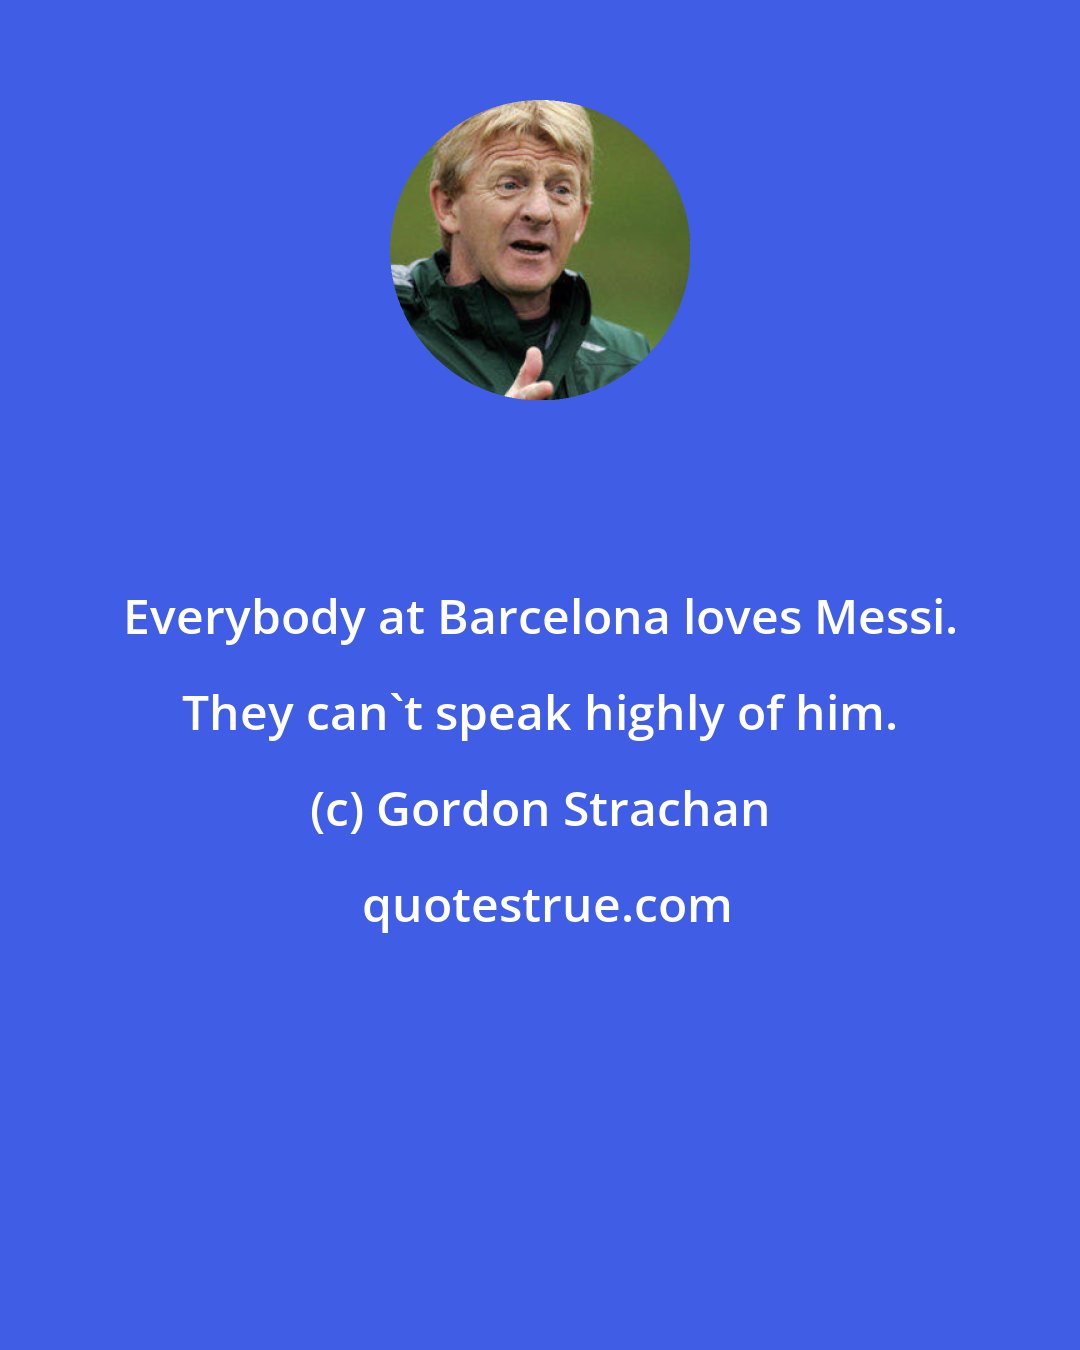 Gordon Strachan: Everybody at Barcelona loves Messi. They can't speak highly of him.